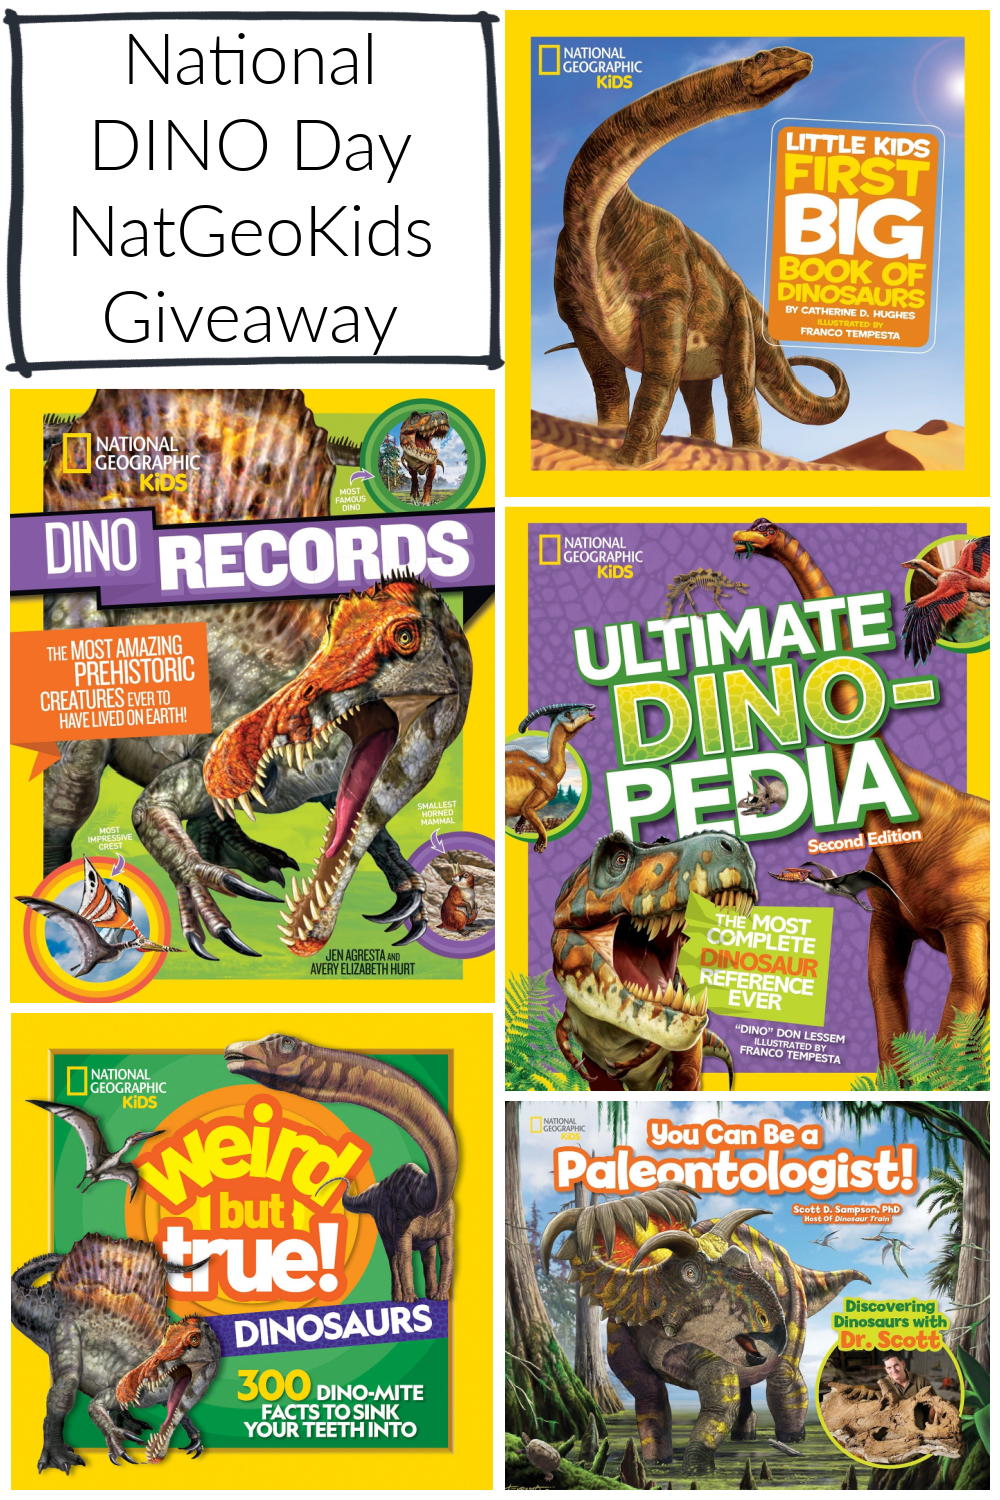 Celebrating National DINO Day with National Geographic Kids